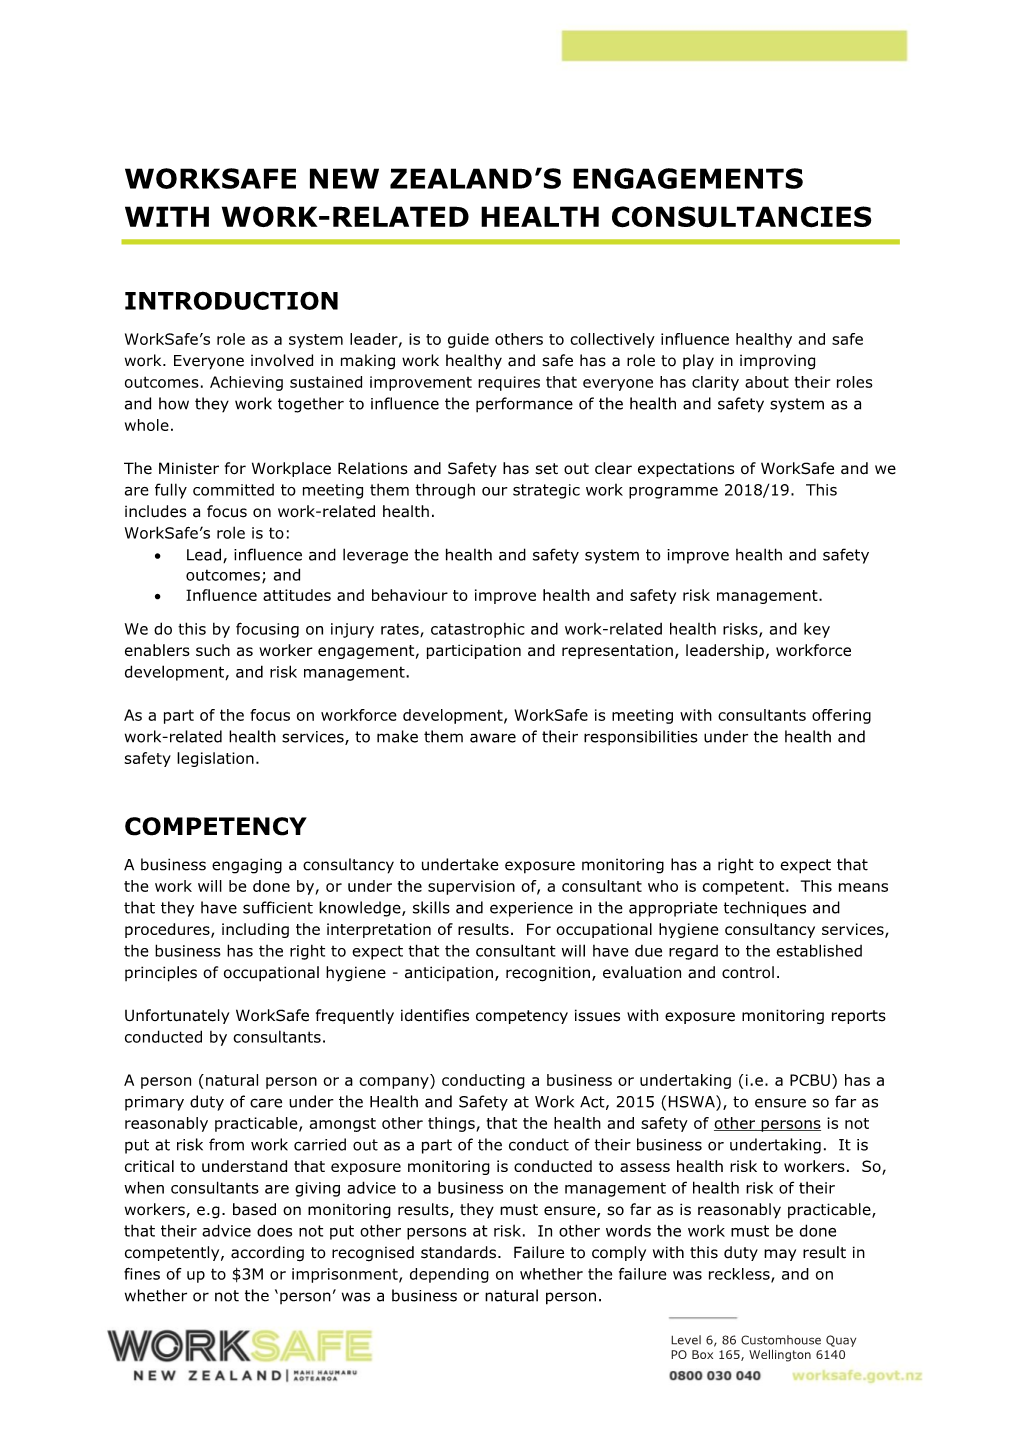 Worksafe New Zealand's Engagements with Work-Related Health Consultancies